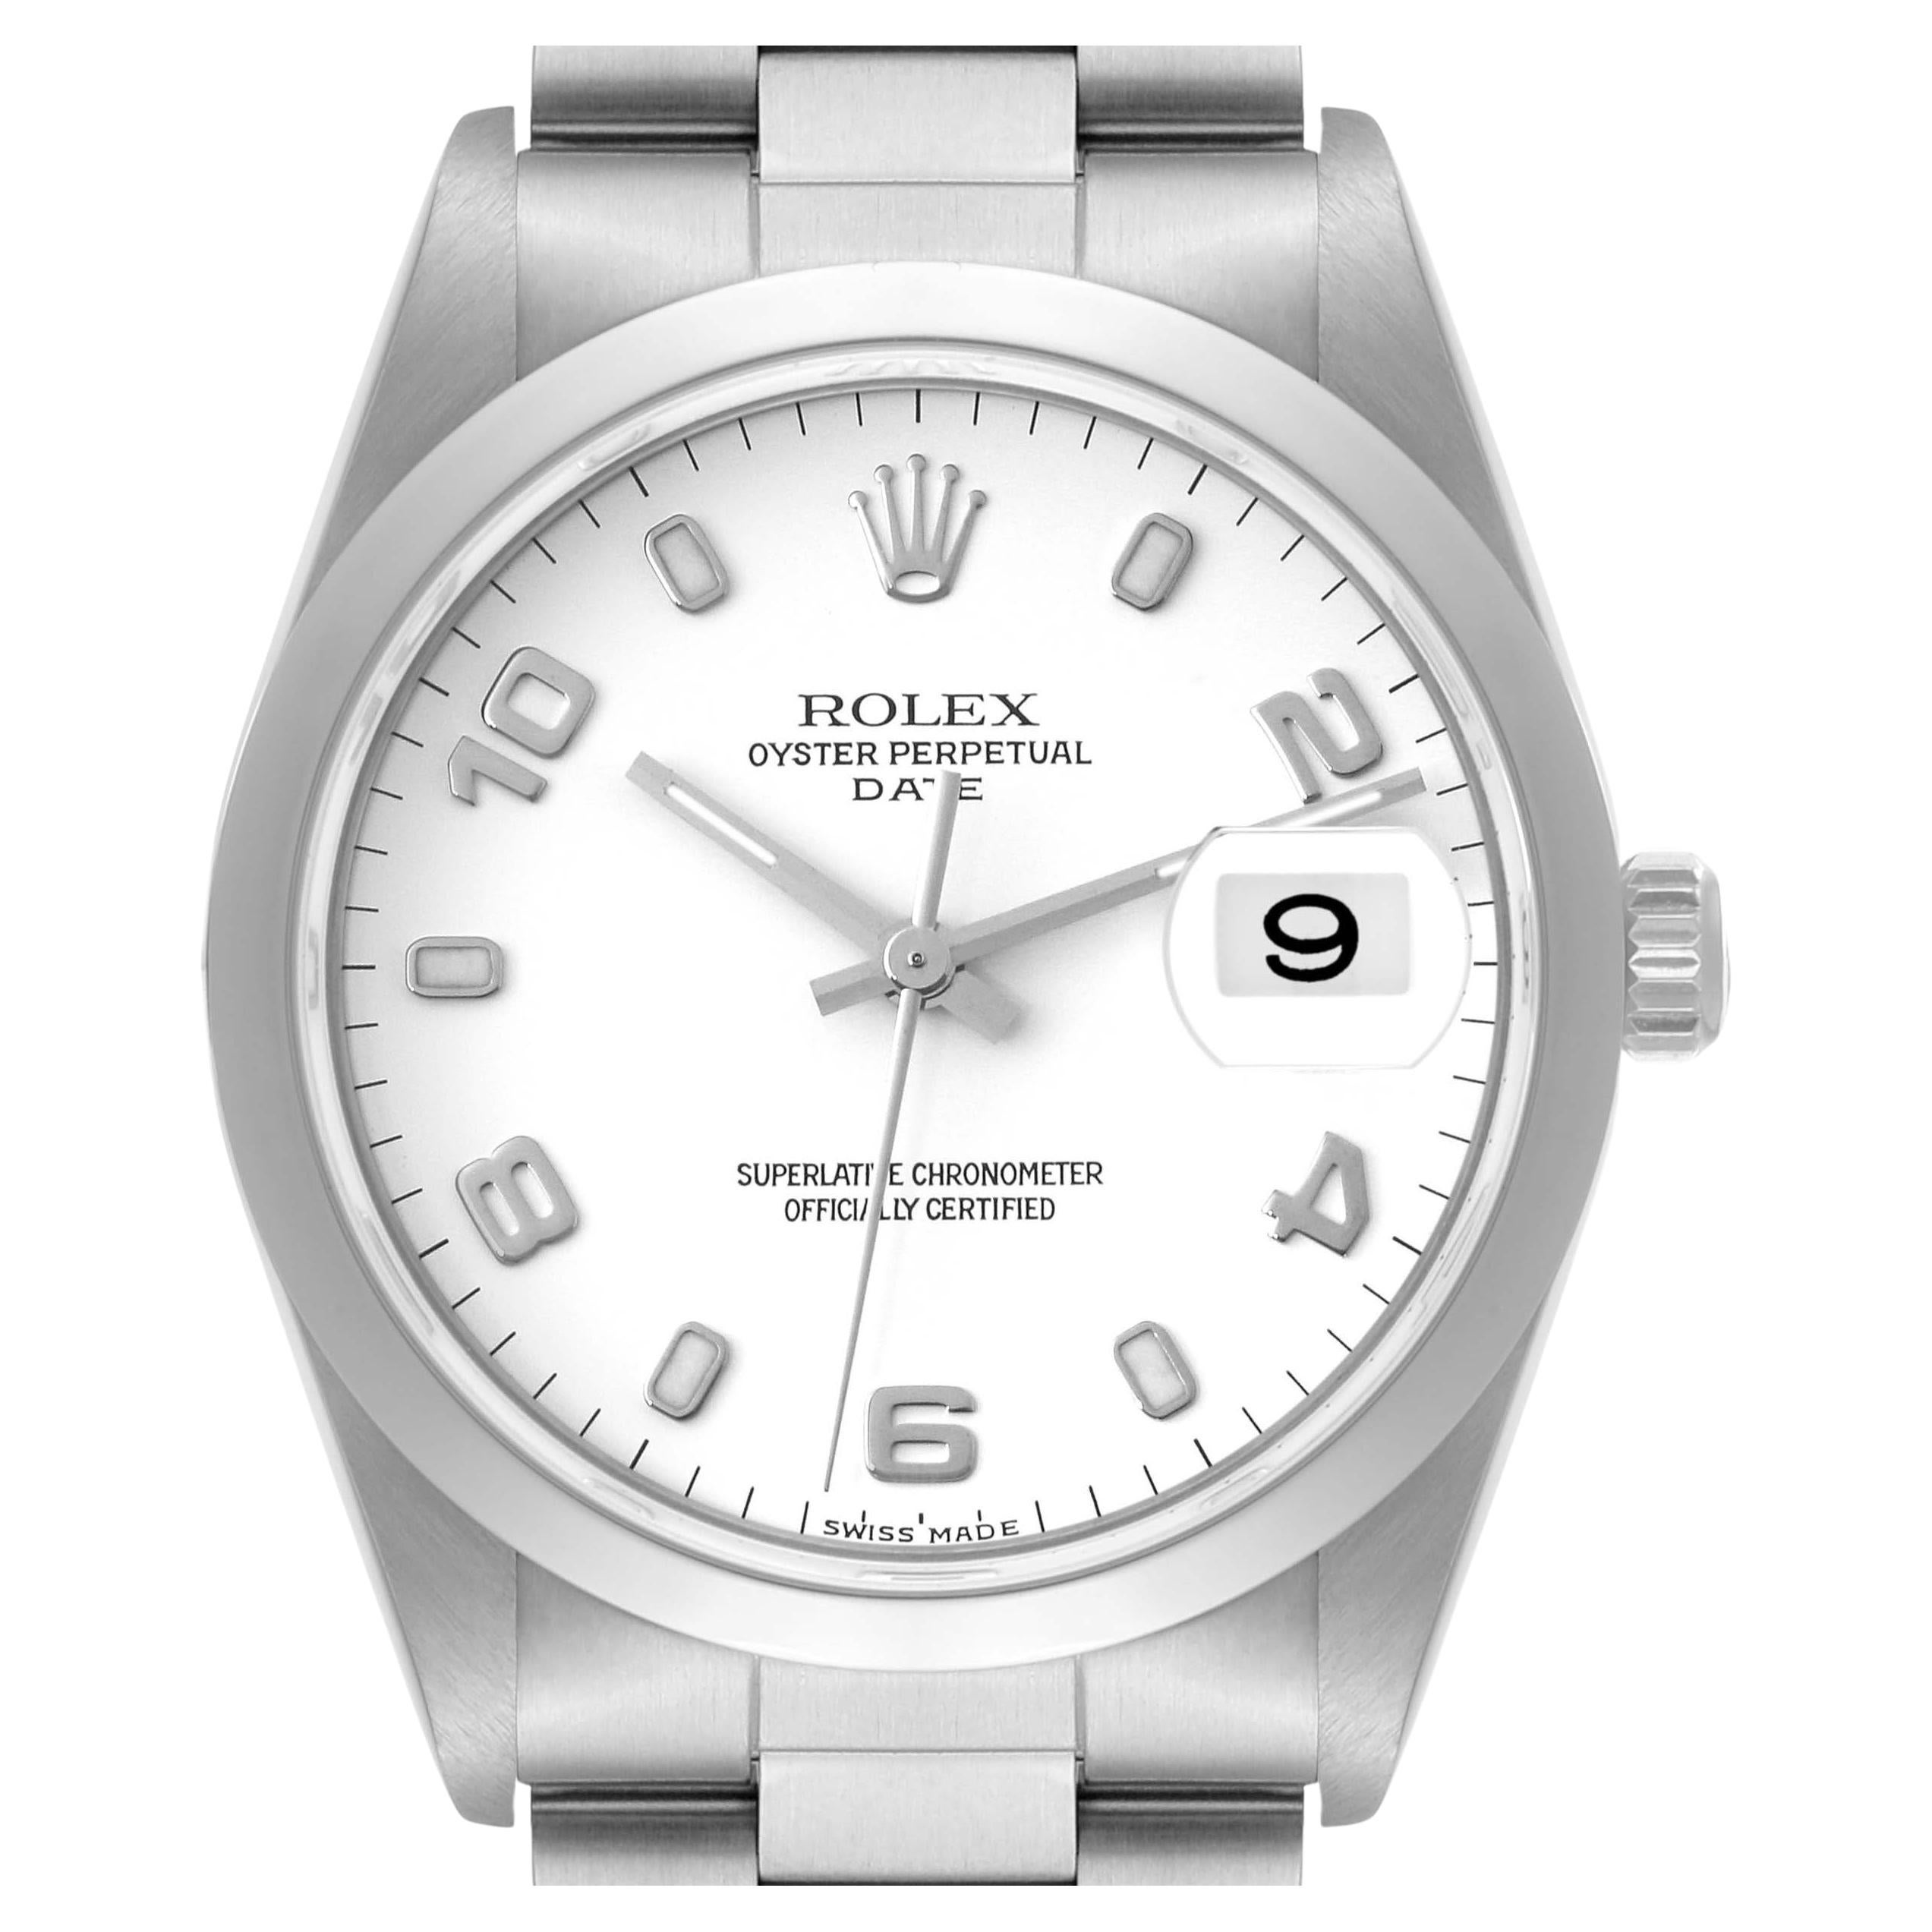 Rolex Date White Dial Oyster Bracelet Steel Mens Watch 15200 Box Papers